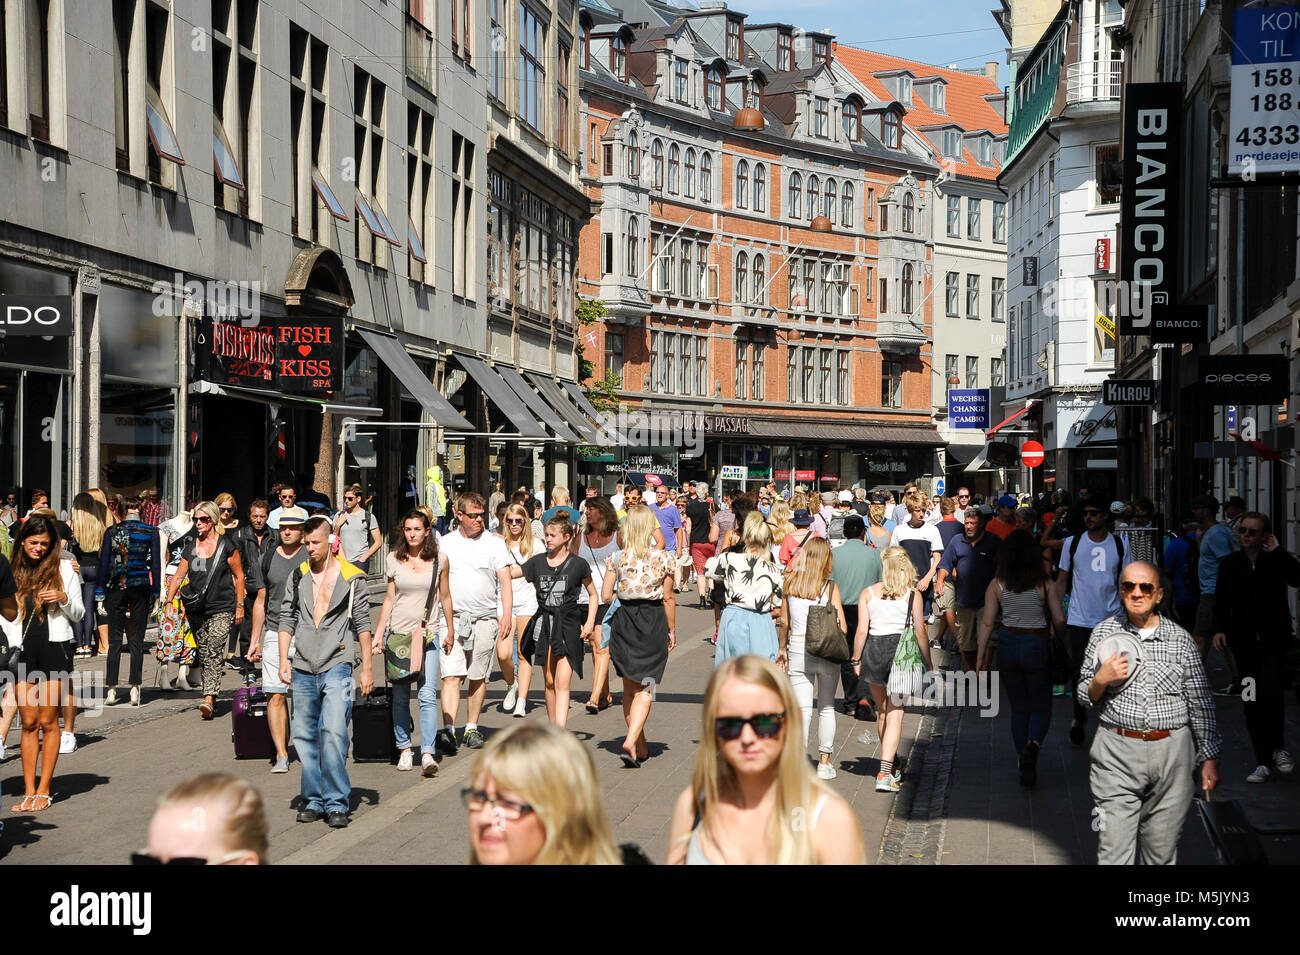 Strøget High Resolution Stock Photography and Images - Alamy